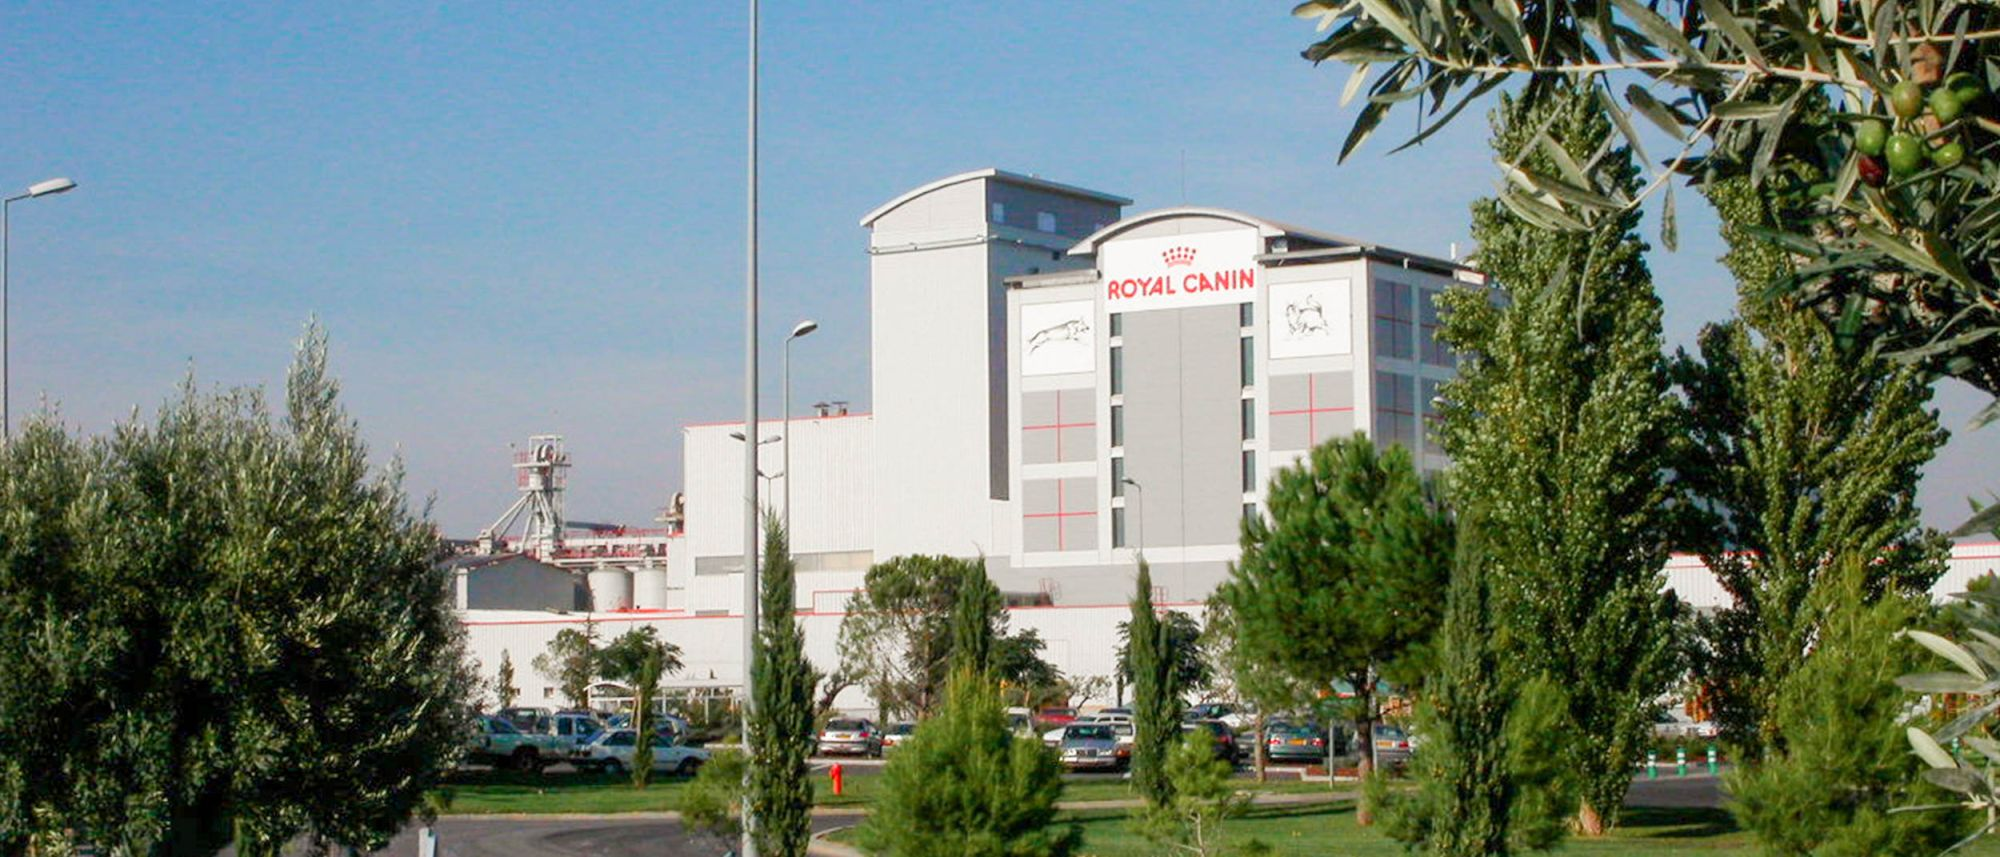 Royal Canin factory in France